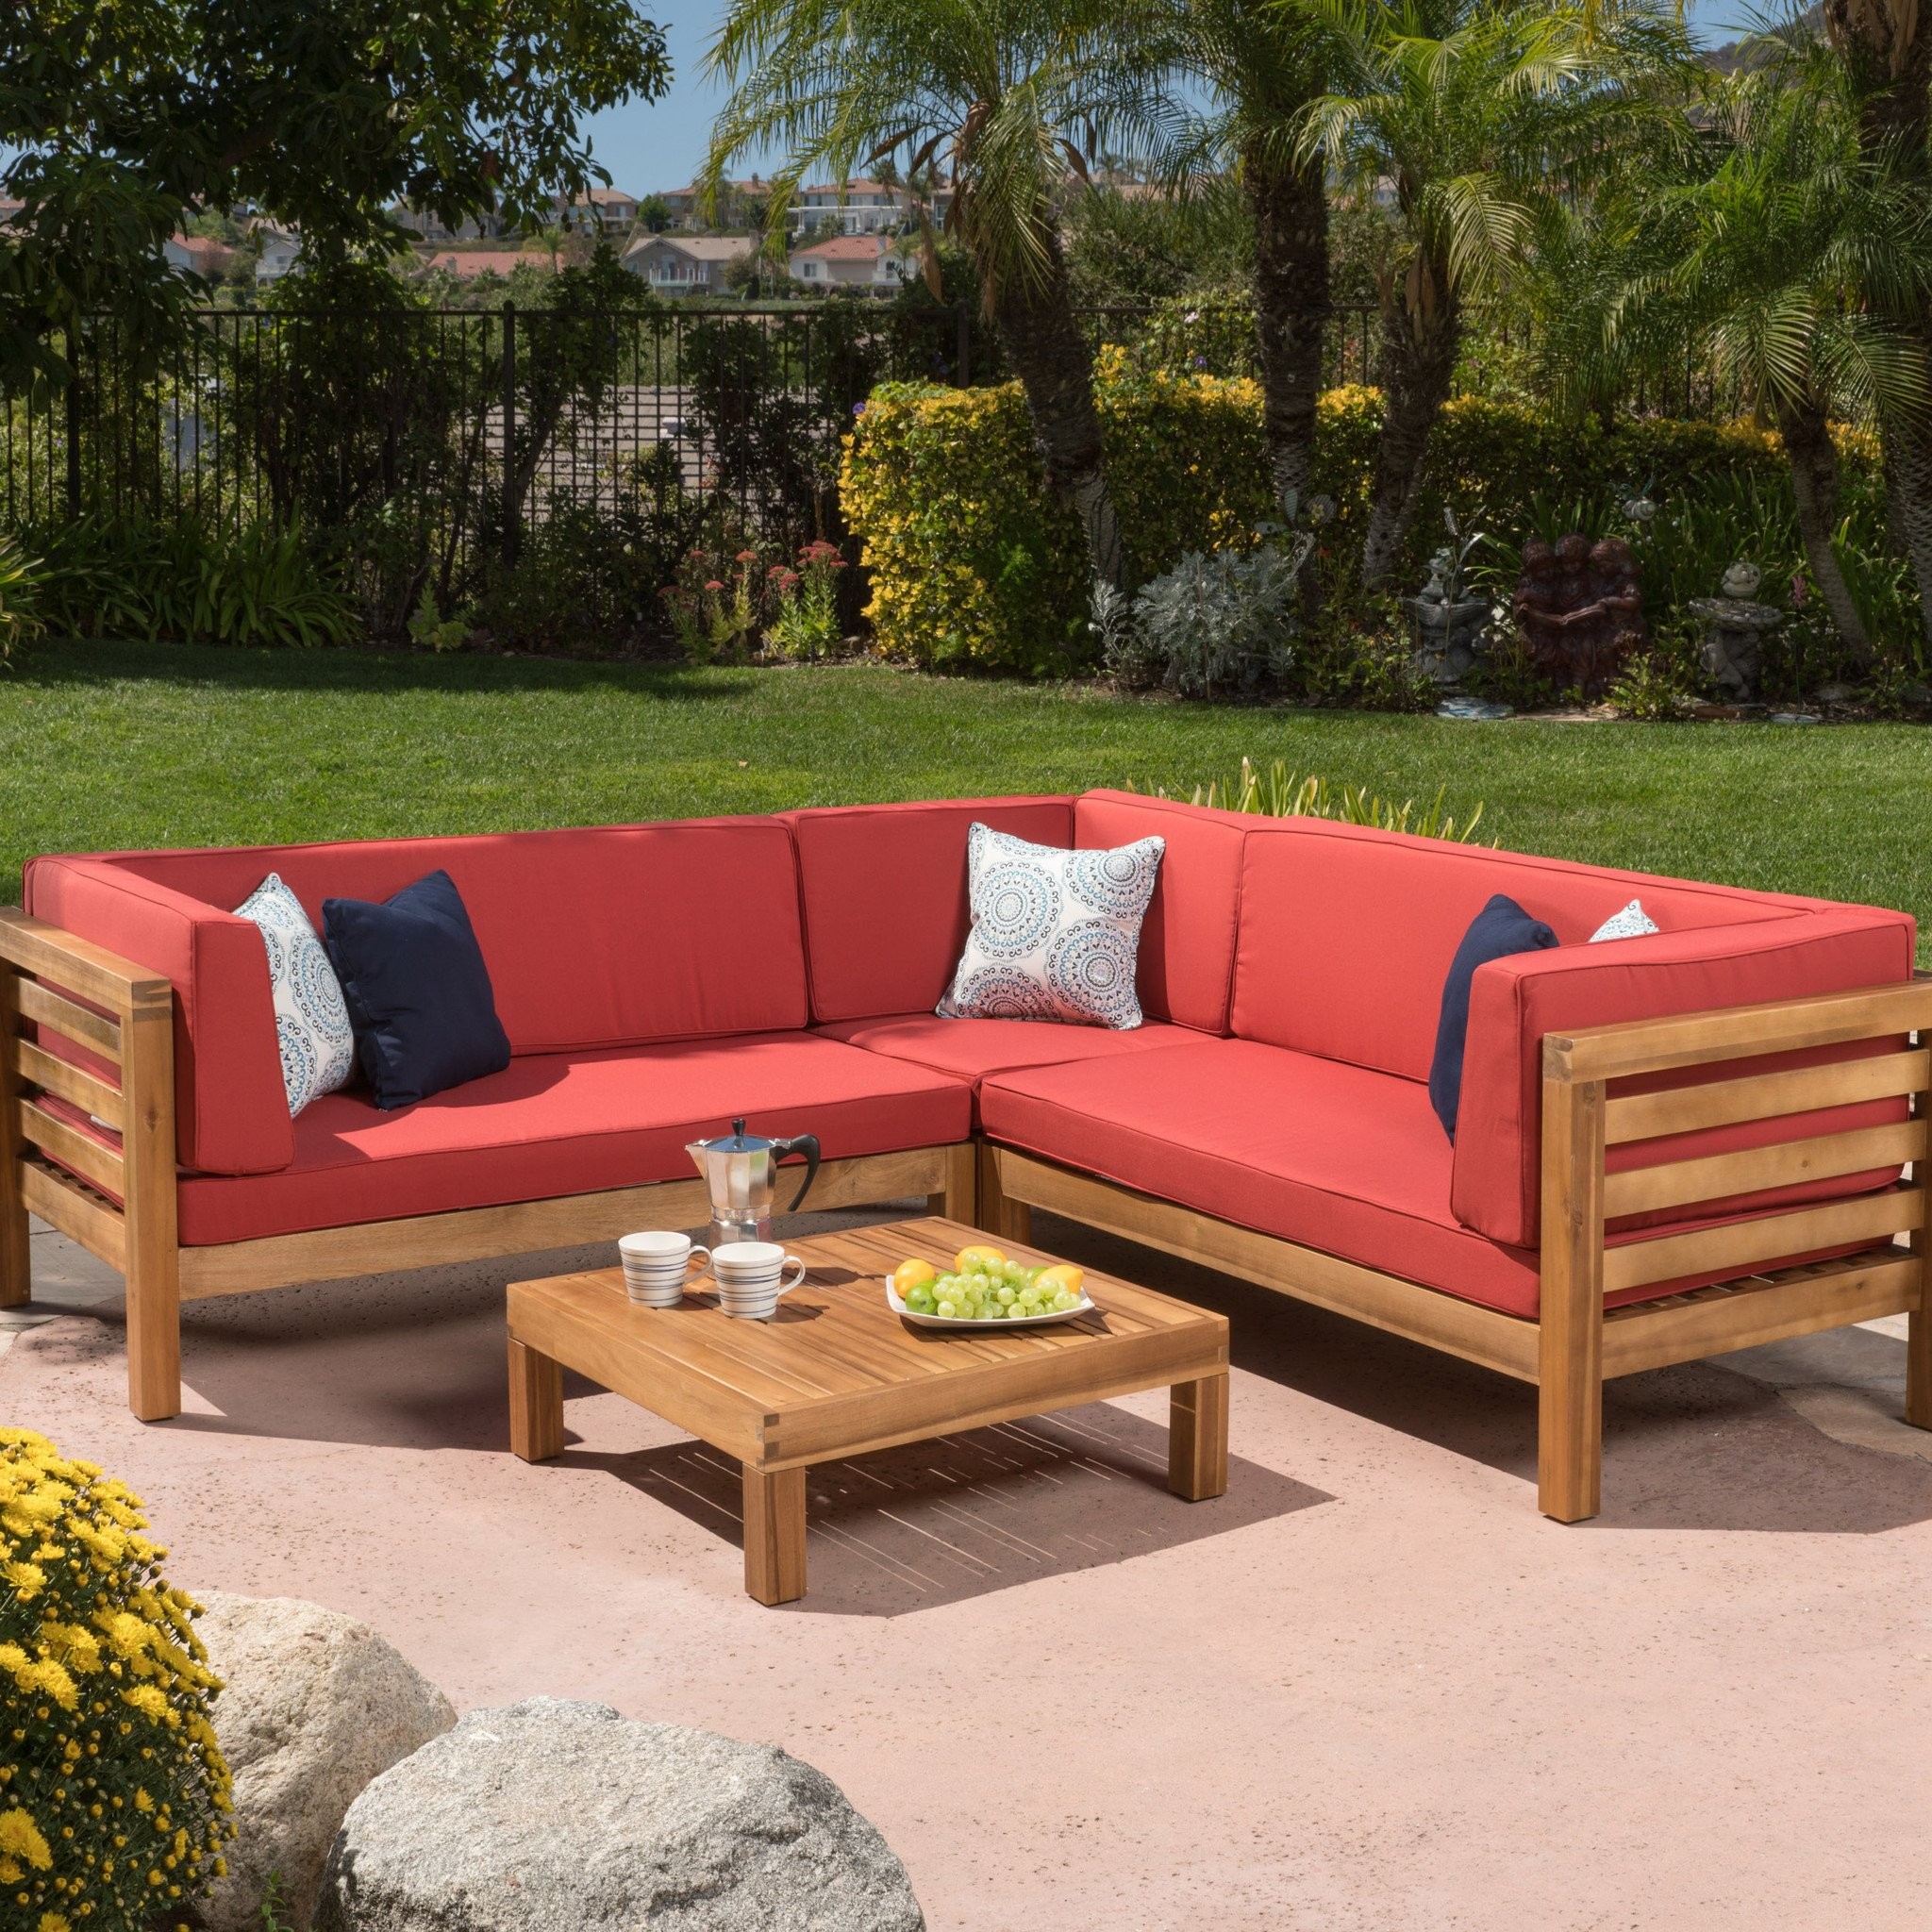 Ravello 4pc Outdoor Sectional Sofa Set w/ Cushions